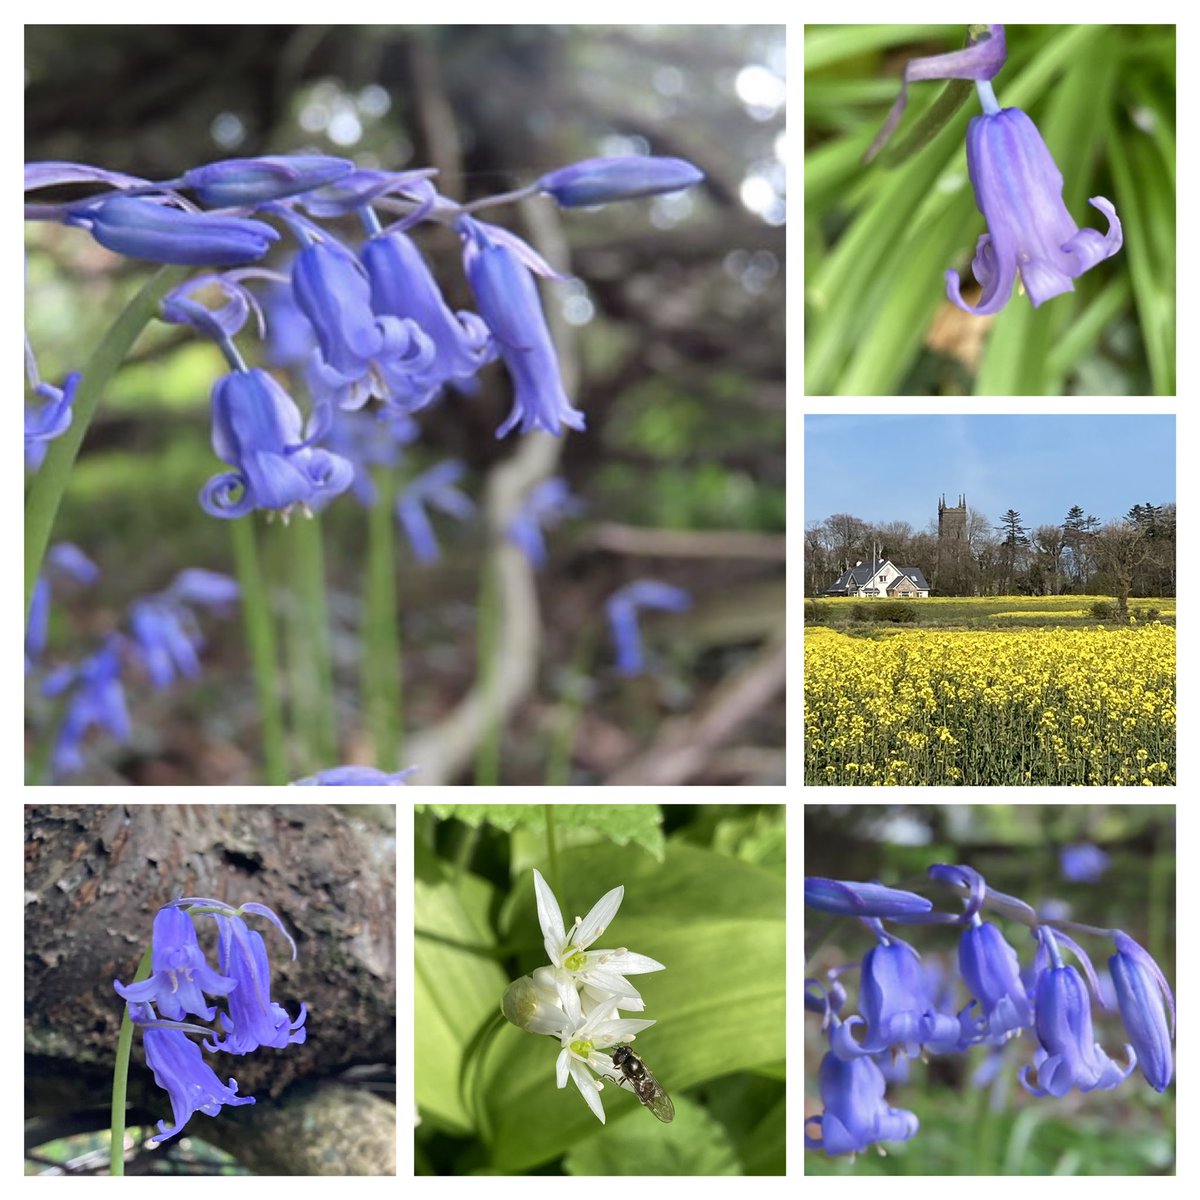 With so many of the big tough Spanish bluebells around it is a joy to see the native bluebells. The surrounding fields looking pretty spectacular ablaze with rapeseed. #SixOnSaturday #SaturdayVibes #GardenersWorld